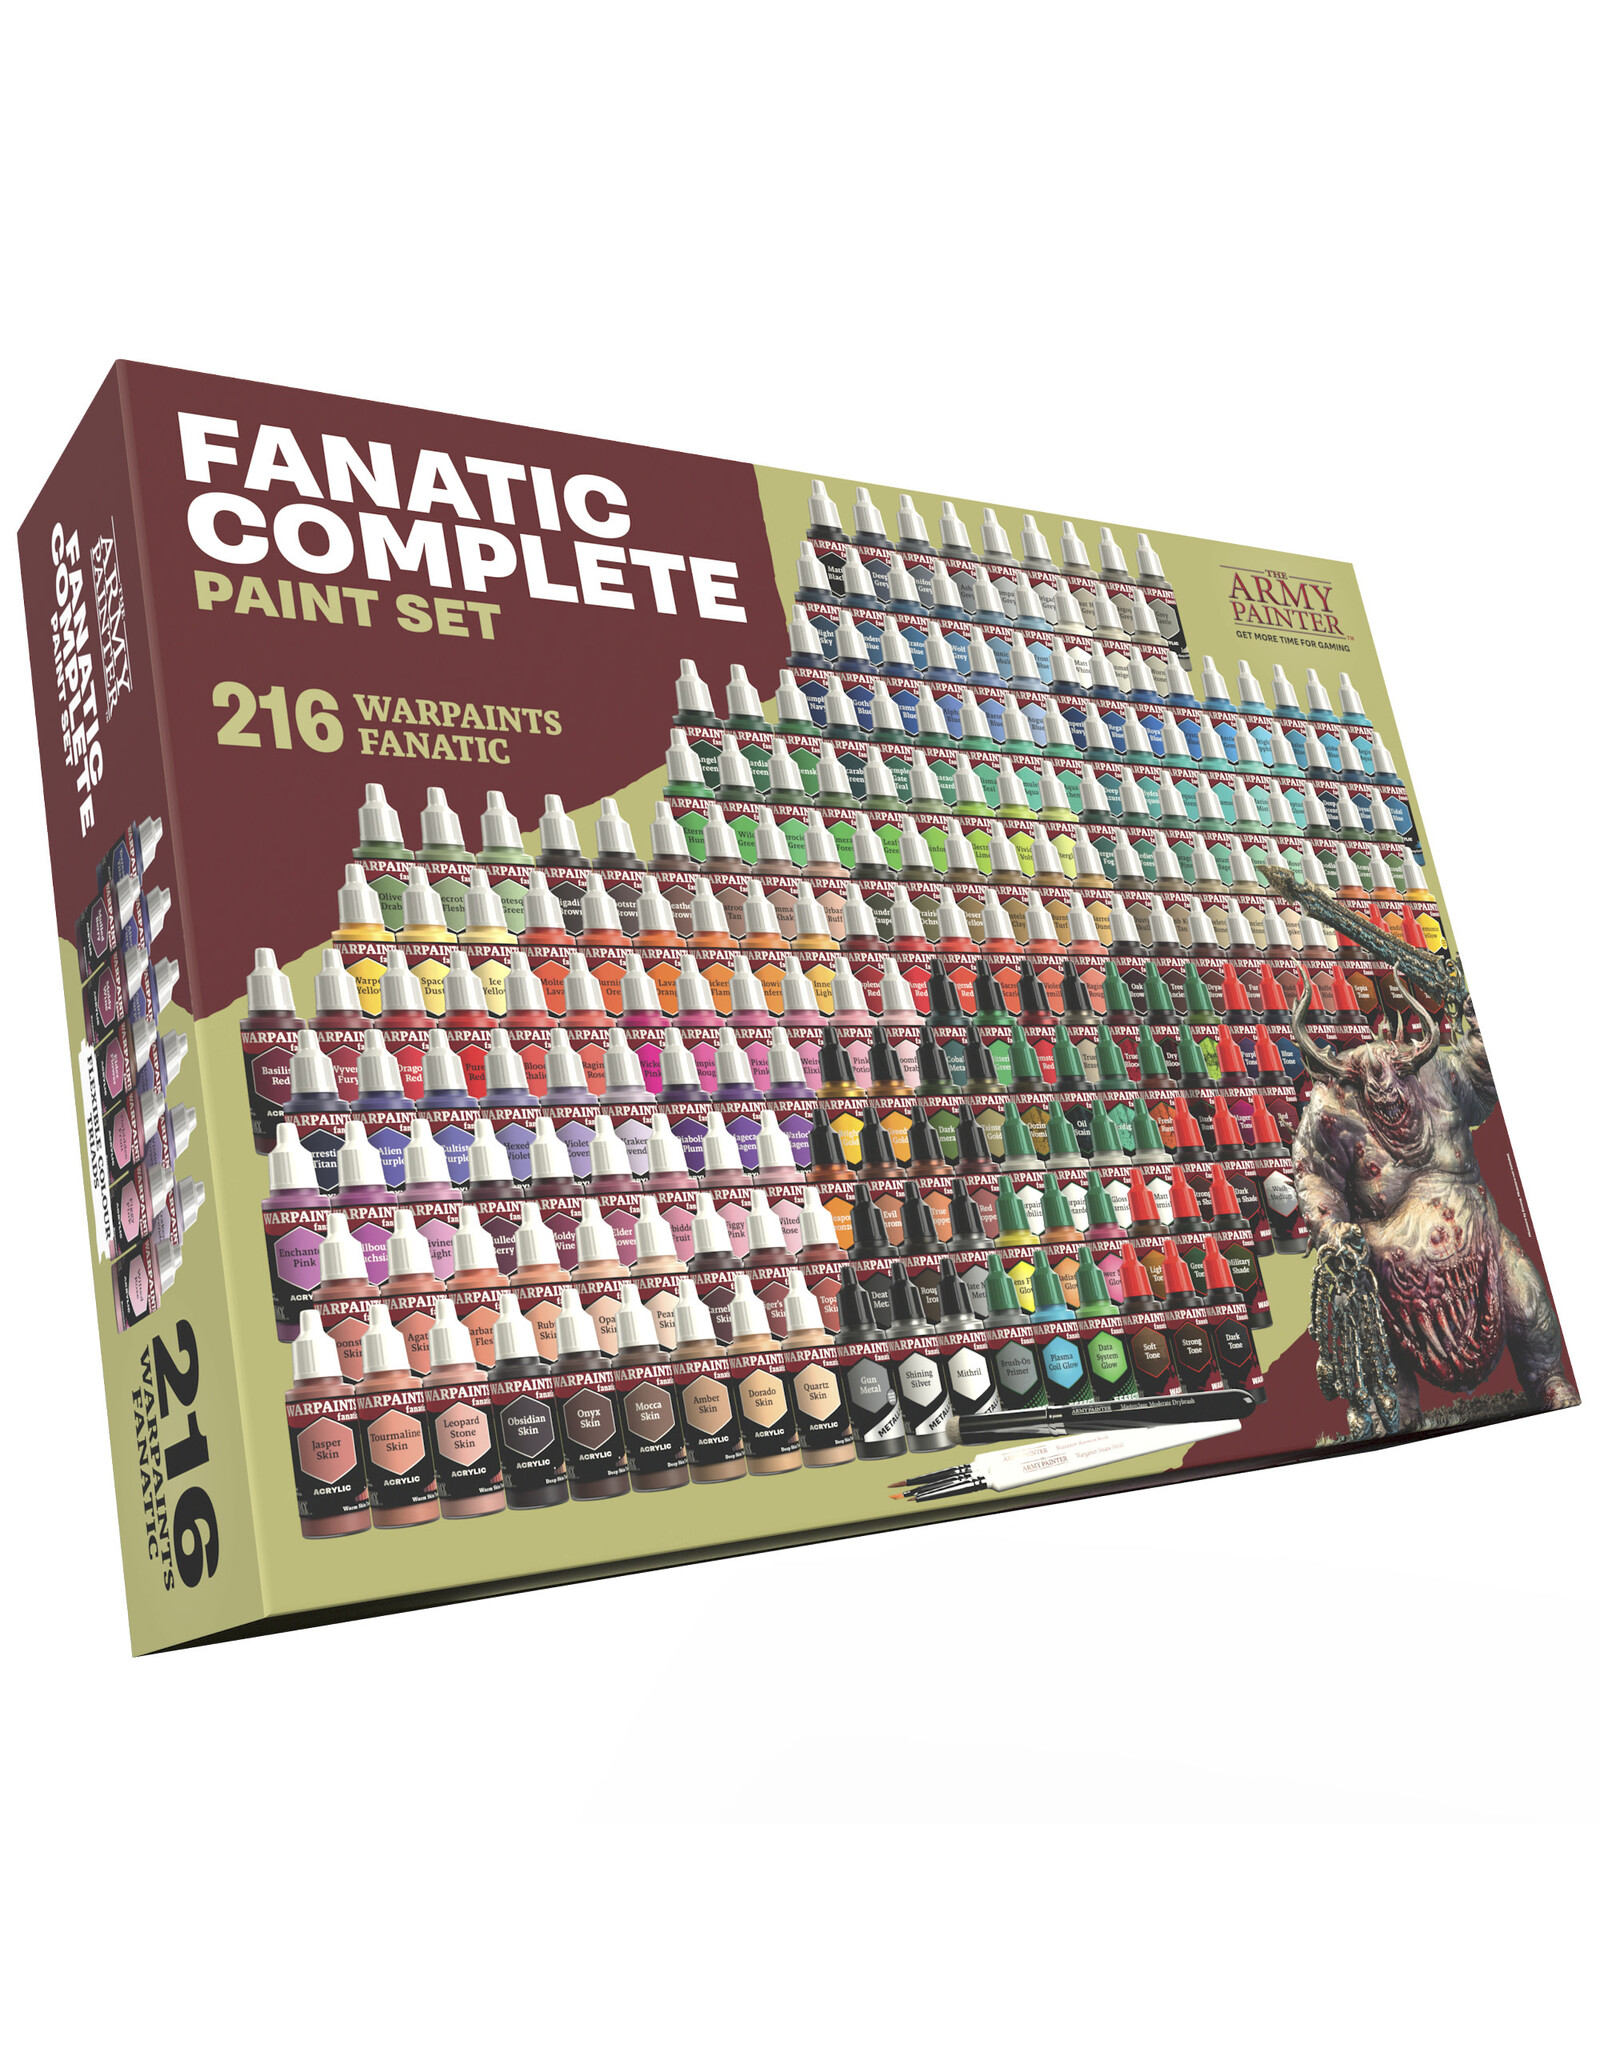 The Army Painter Warpaints Fanatic Paint Review (Impressions) - Tangible Day